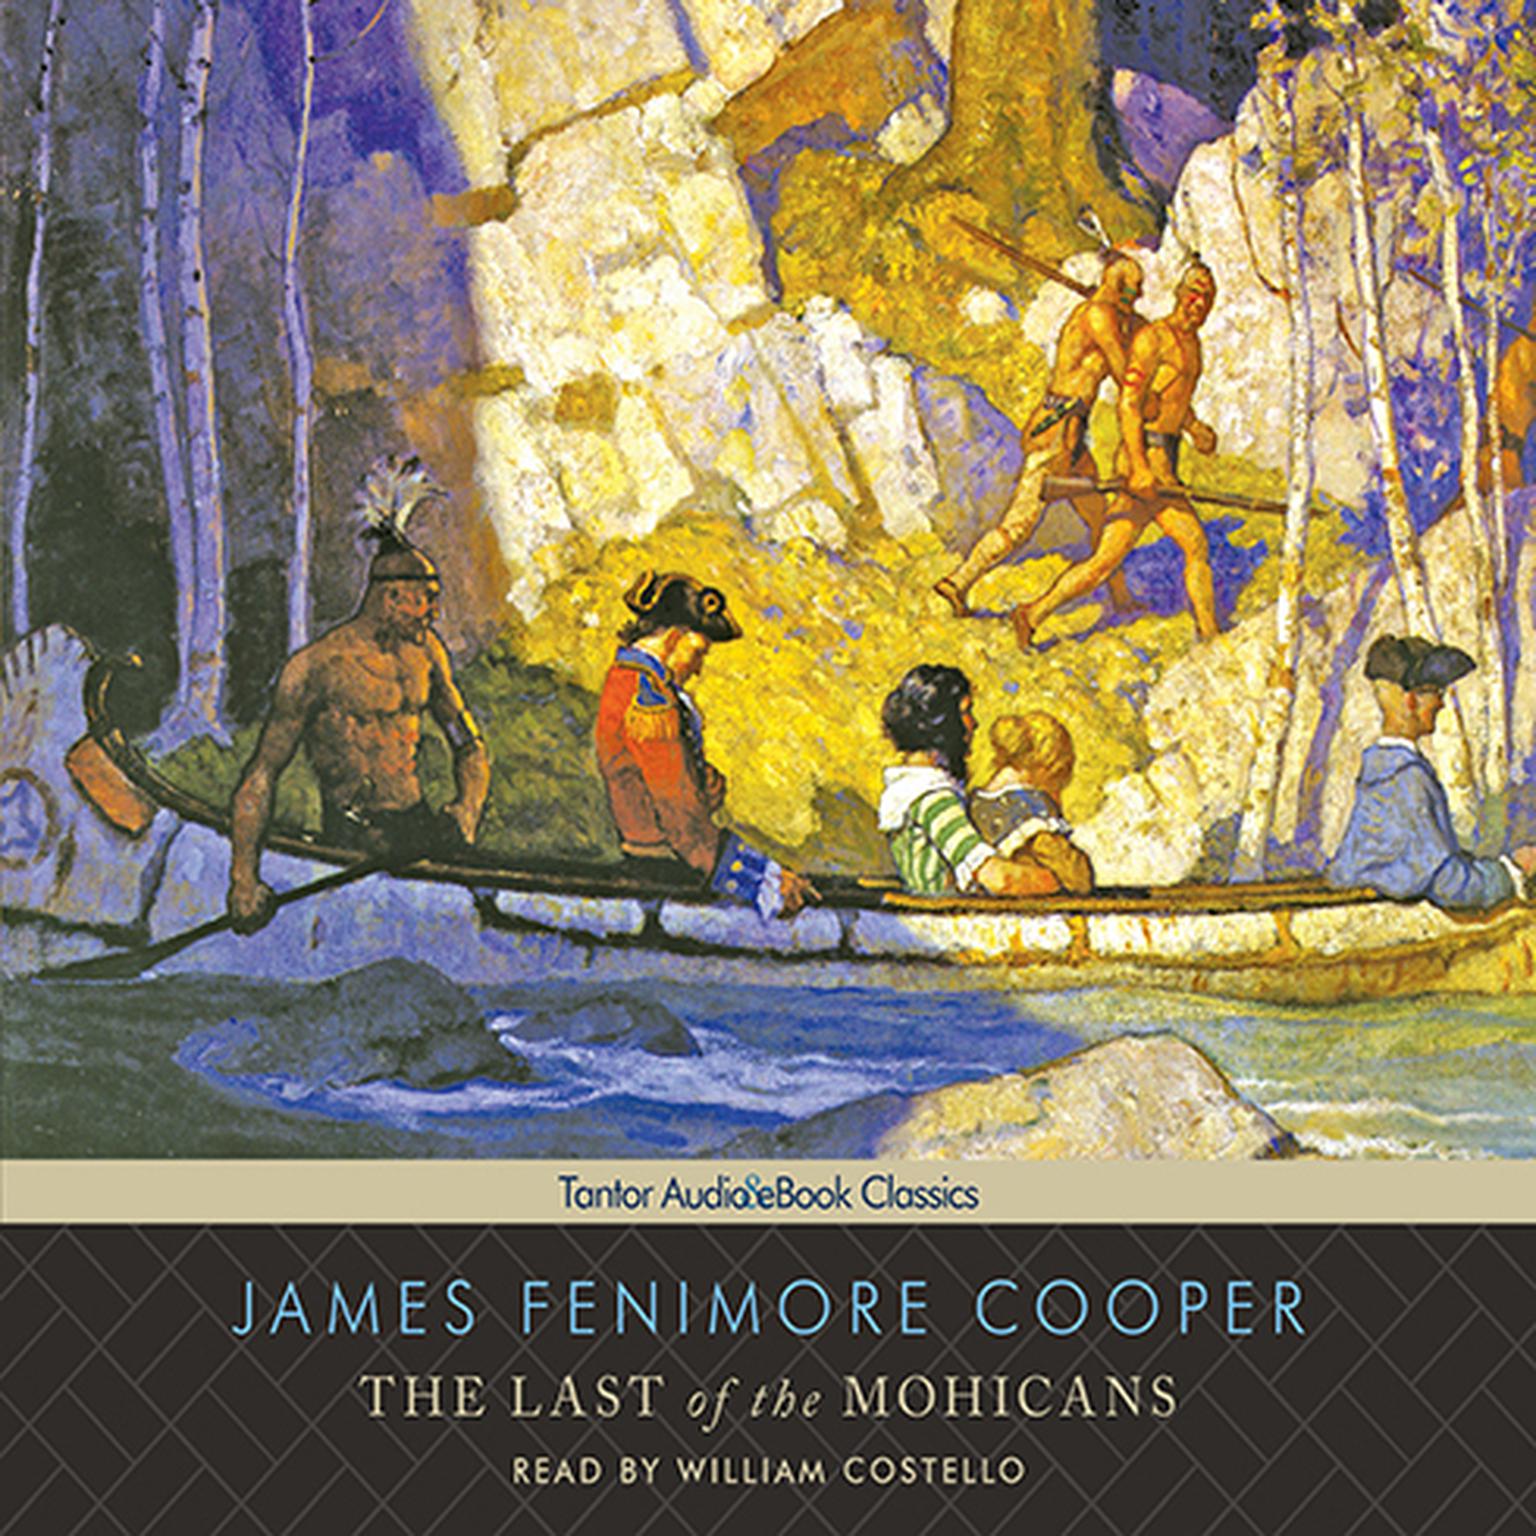 The Last of the Mohicans, with eBook Audiobook, by James Fenimore Cooper